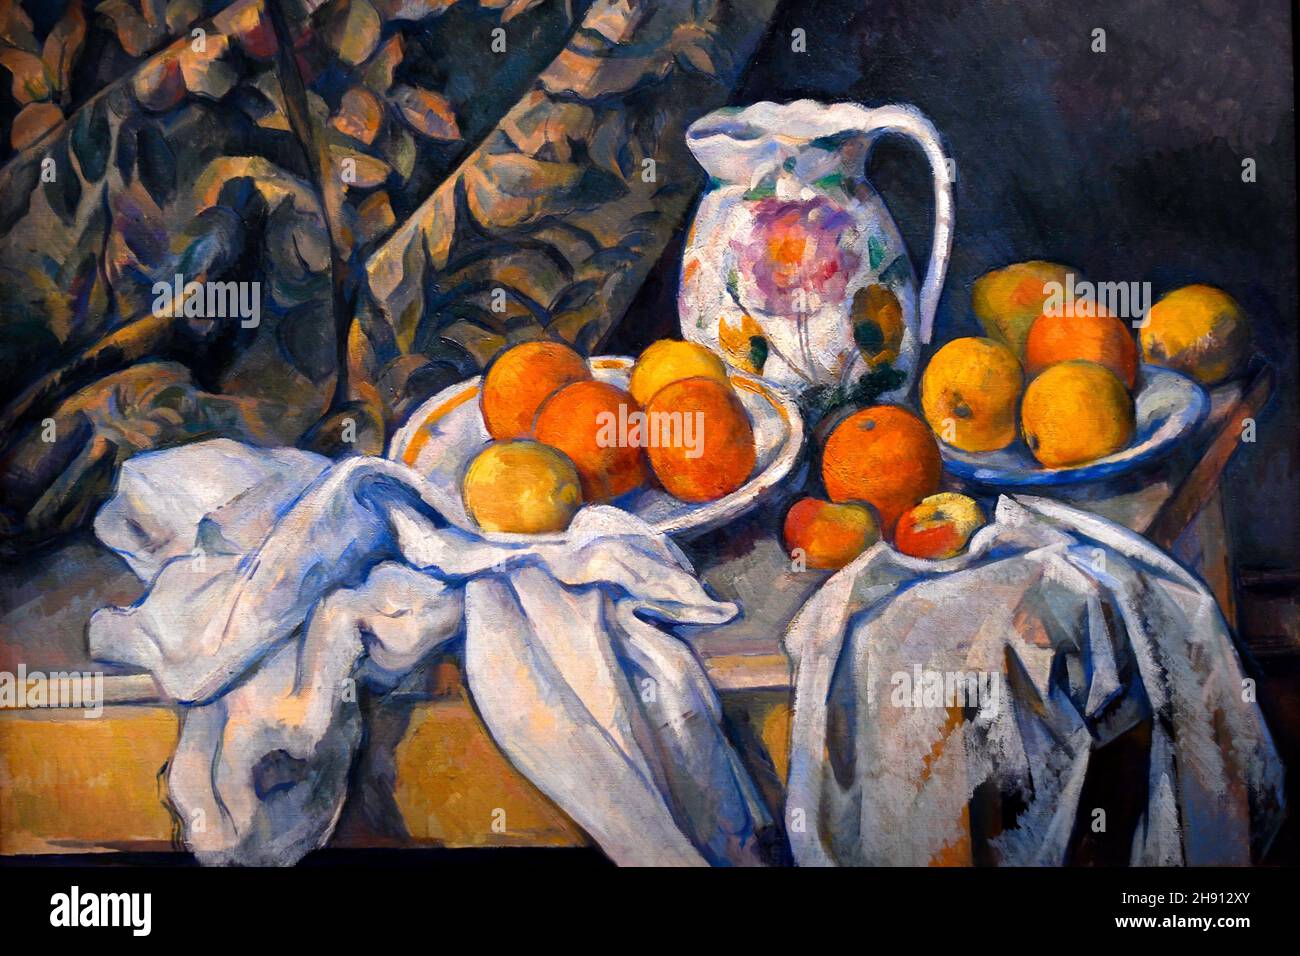 Still Life with a Curtain, 1892-1894, Paul Cézanne, Ermitage museum, St Petersbourg, Russia, on display at the exhibition Icons of Modern Art. Stock Photo